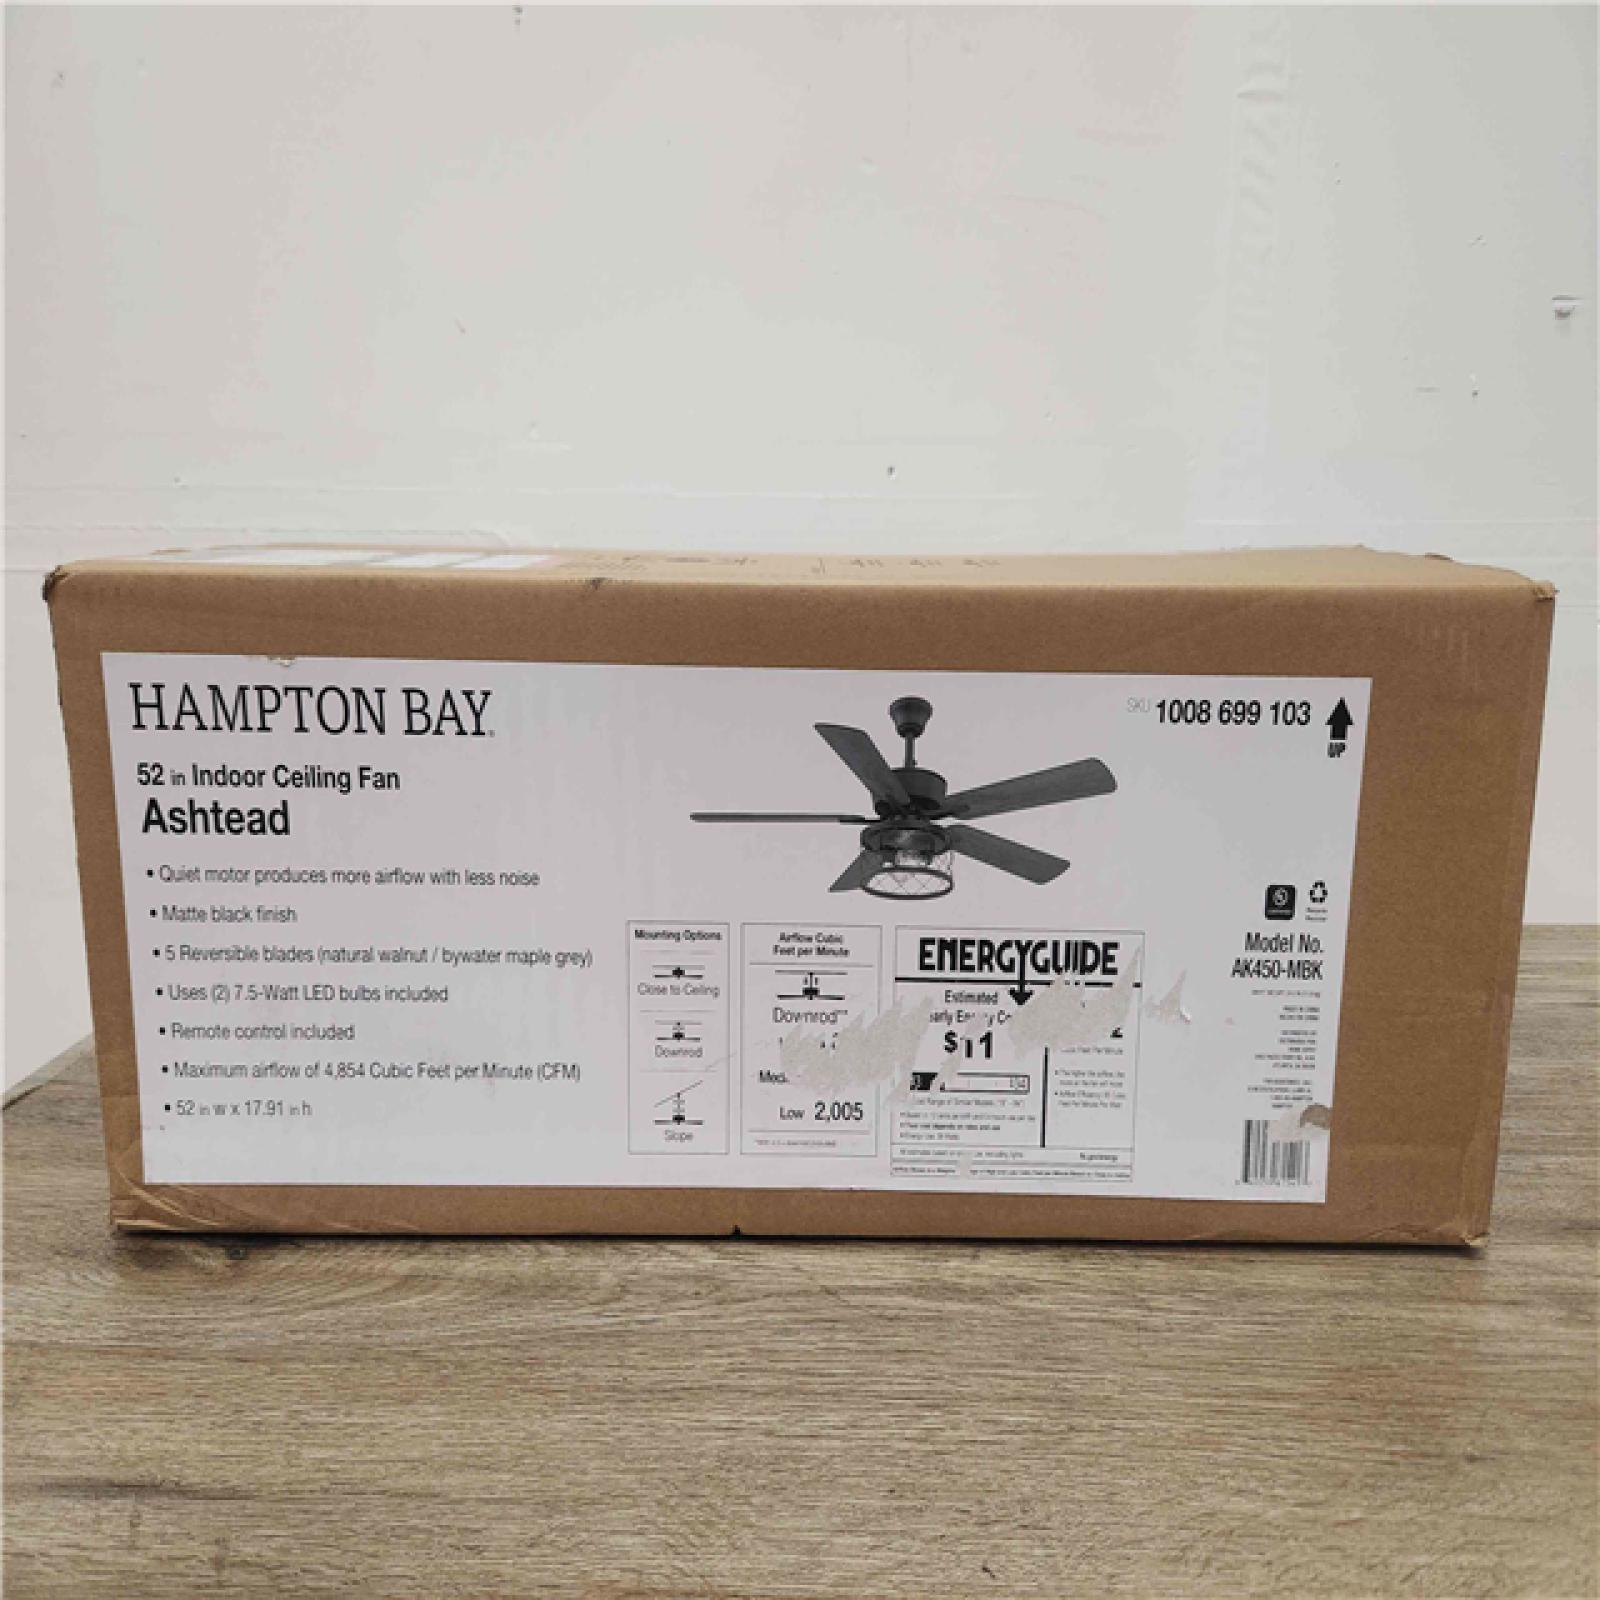 Hampton Bay Ashtead 52 in. LED Indoor Matte Black Ceiling Fan with Light and Remote Control Included